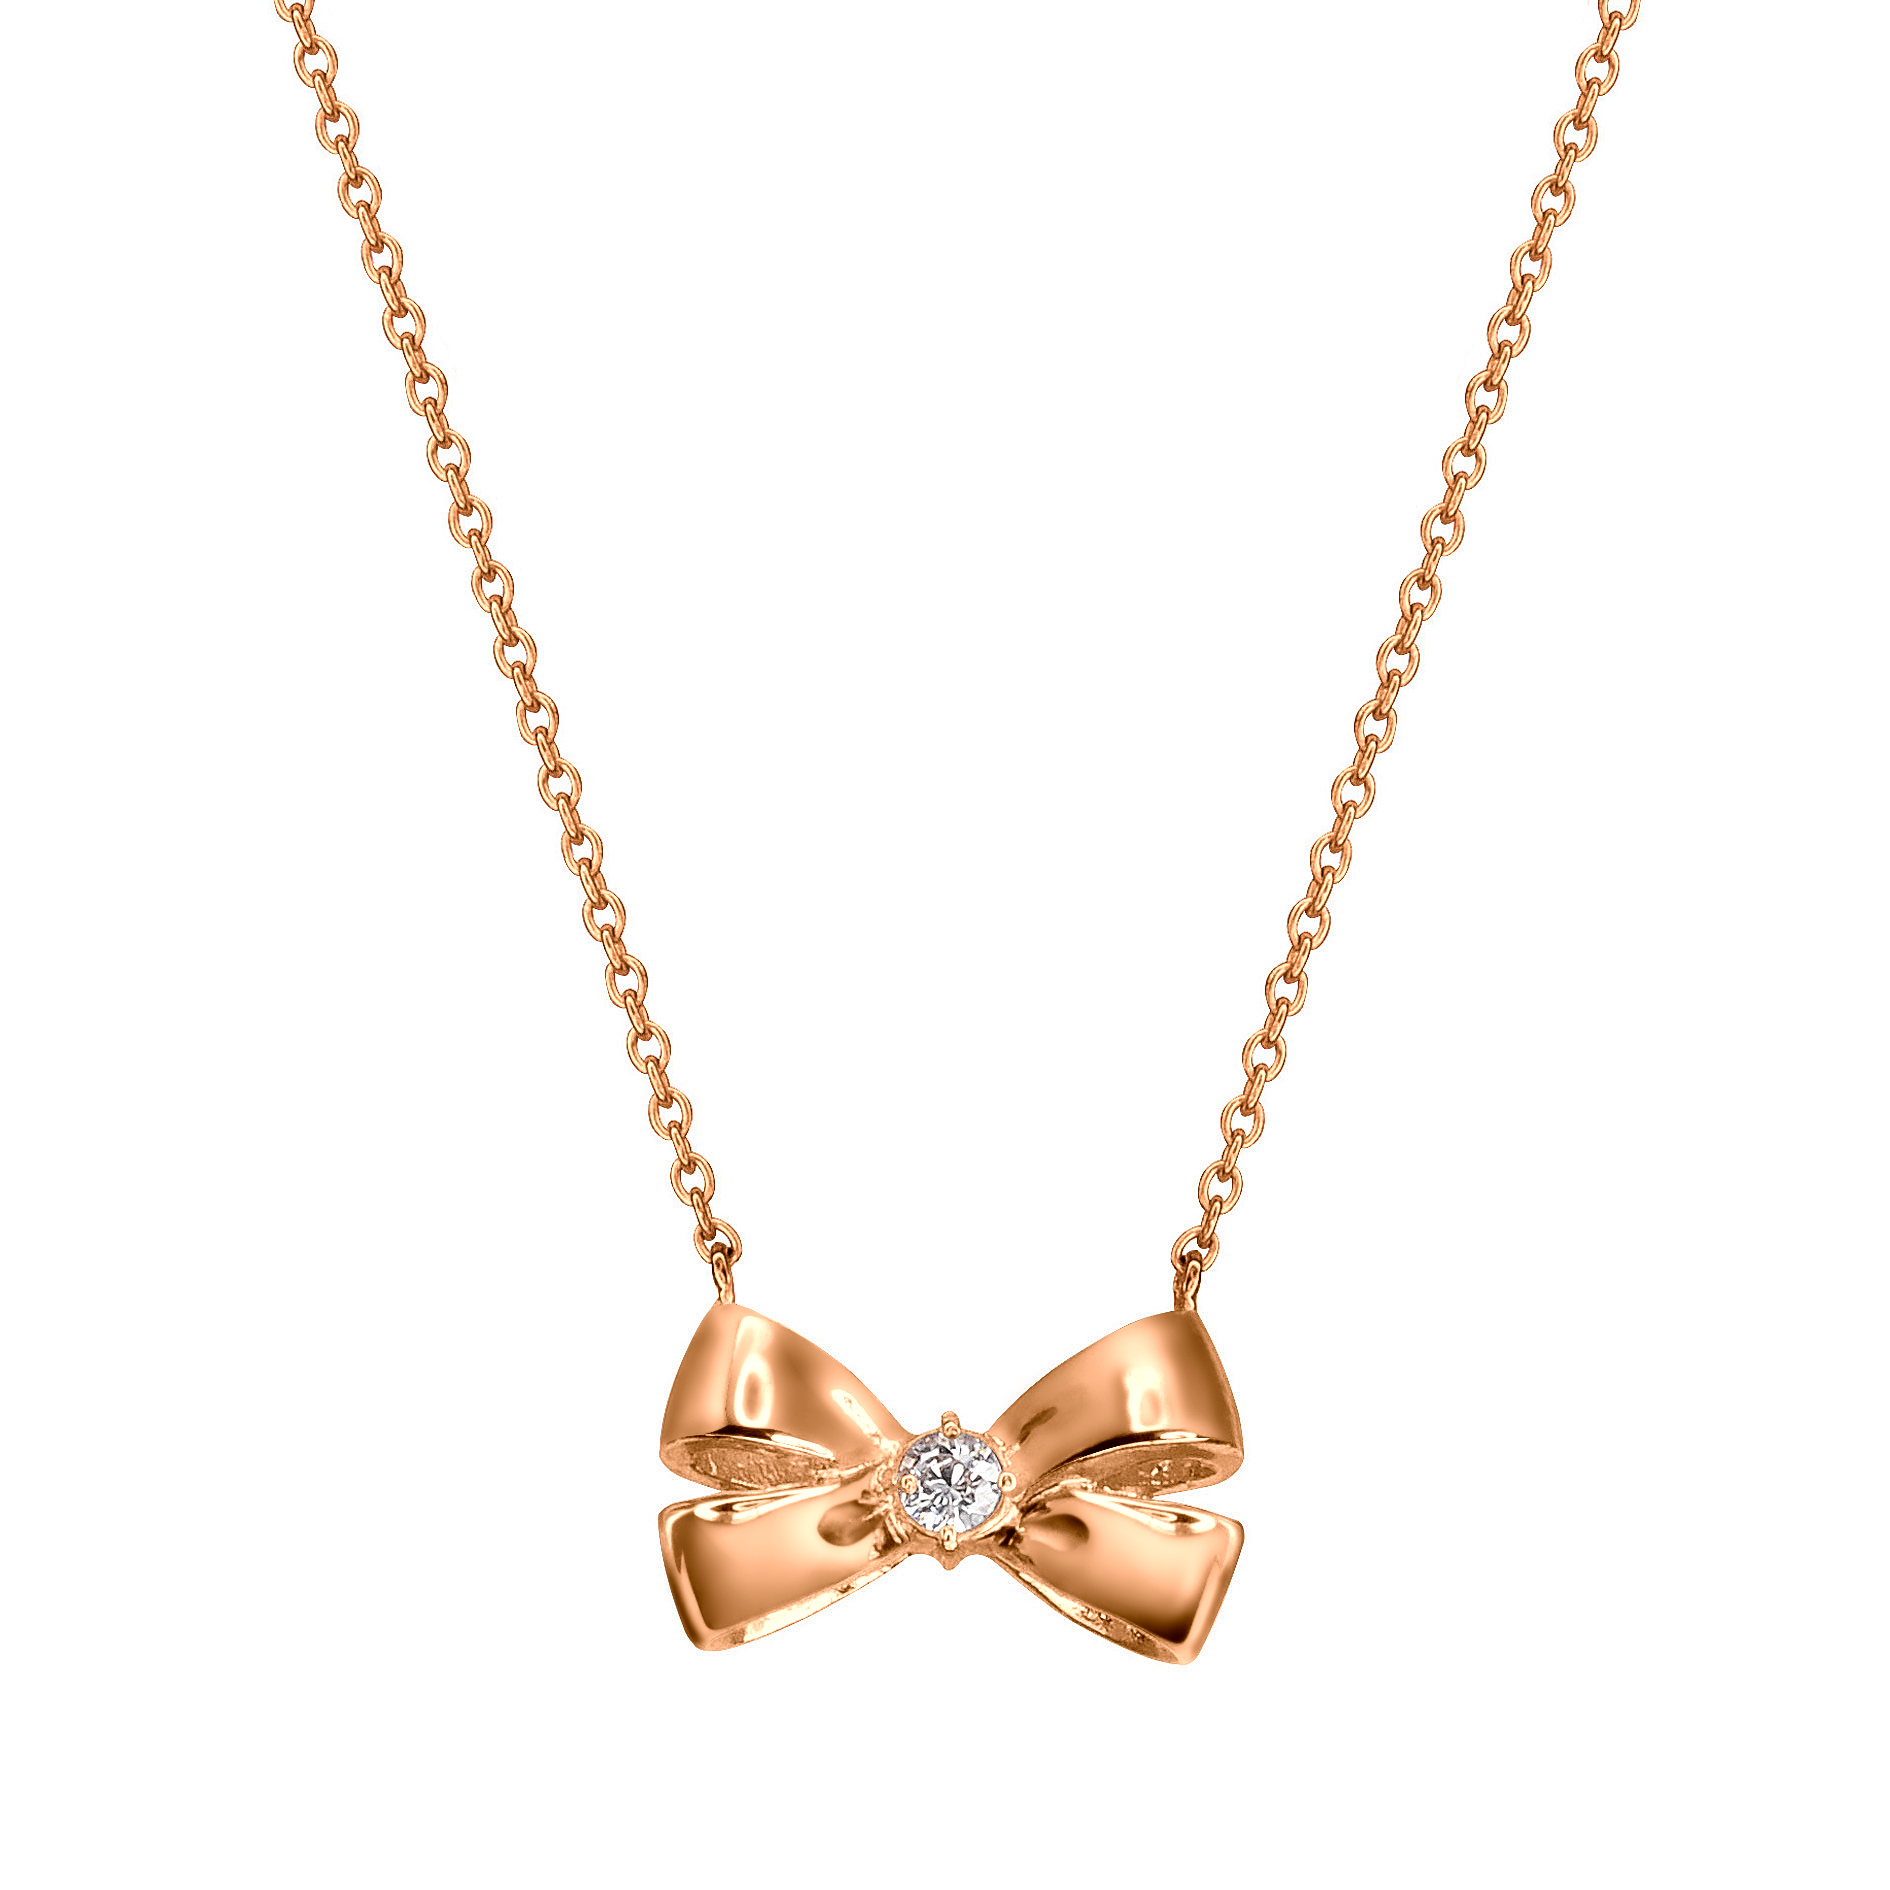 Ribbon Necklace, Sterling Silver, Rose-Gold Tone Plated 